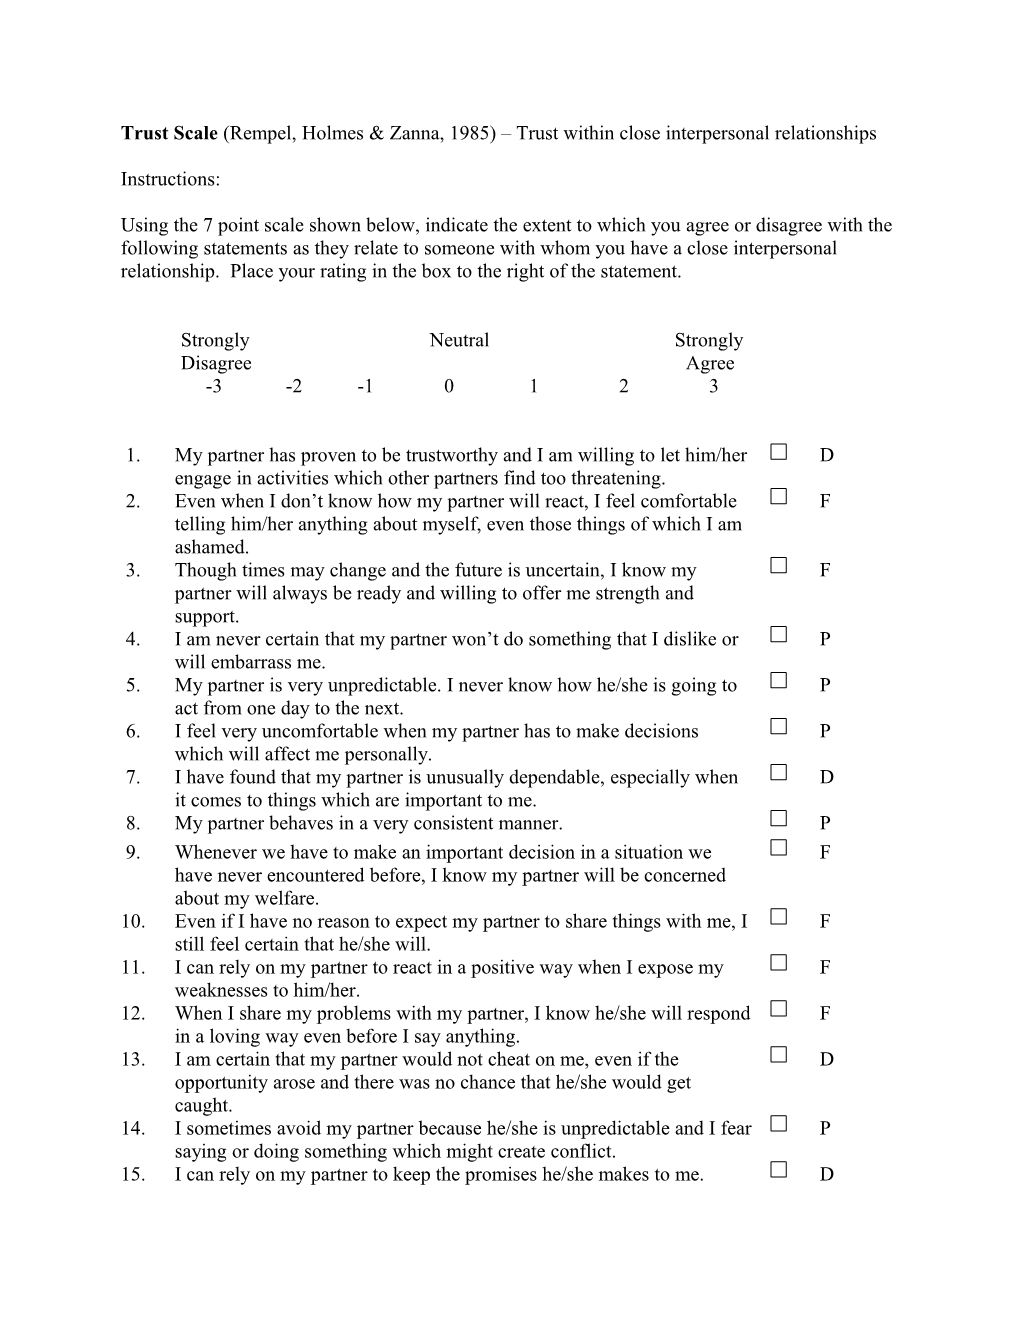 Aggression Questionnaire (Buss & Perry, 1992)